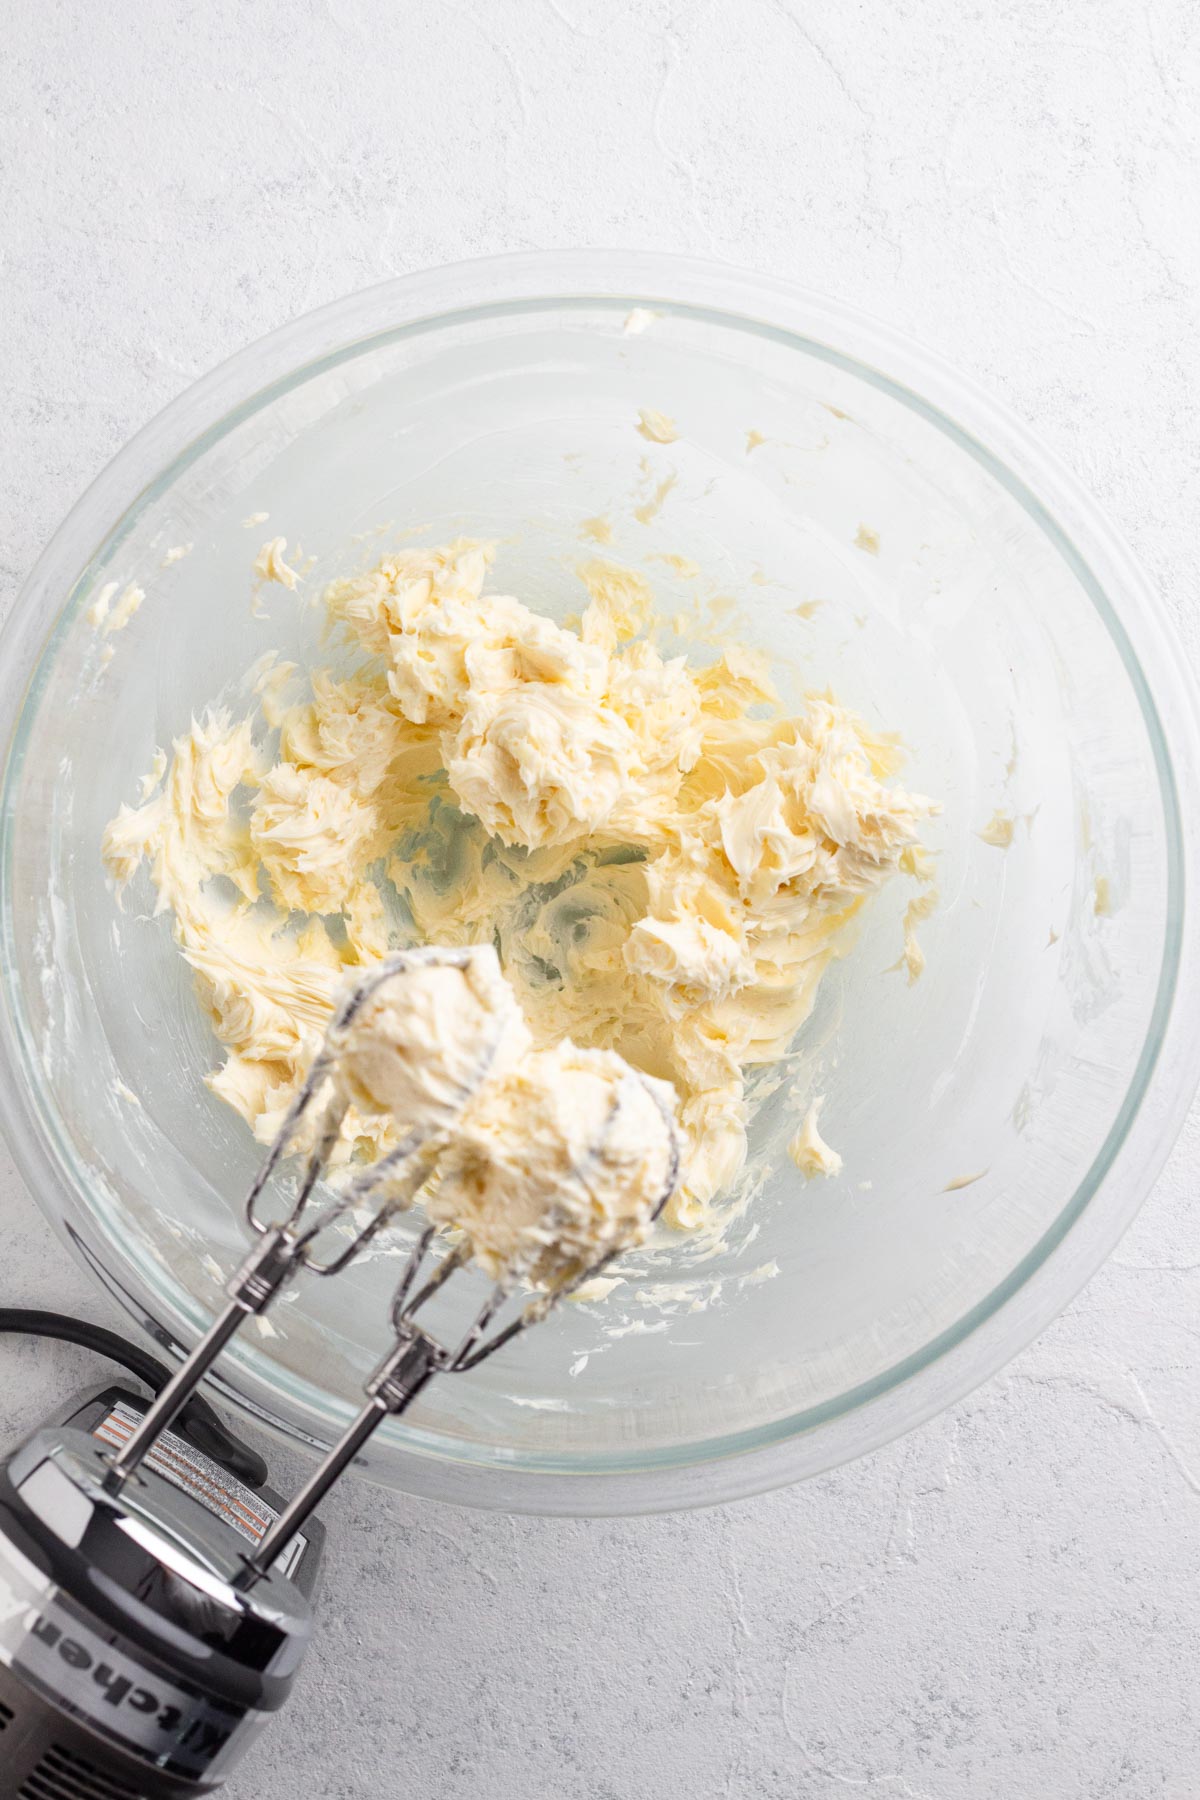 Beaten butter in a glass mixing bowl with a hand mixer.